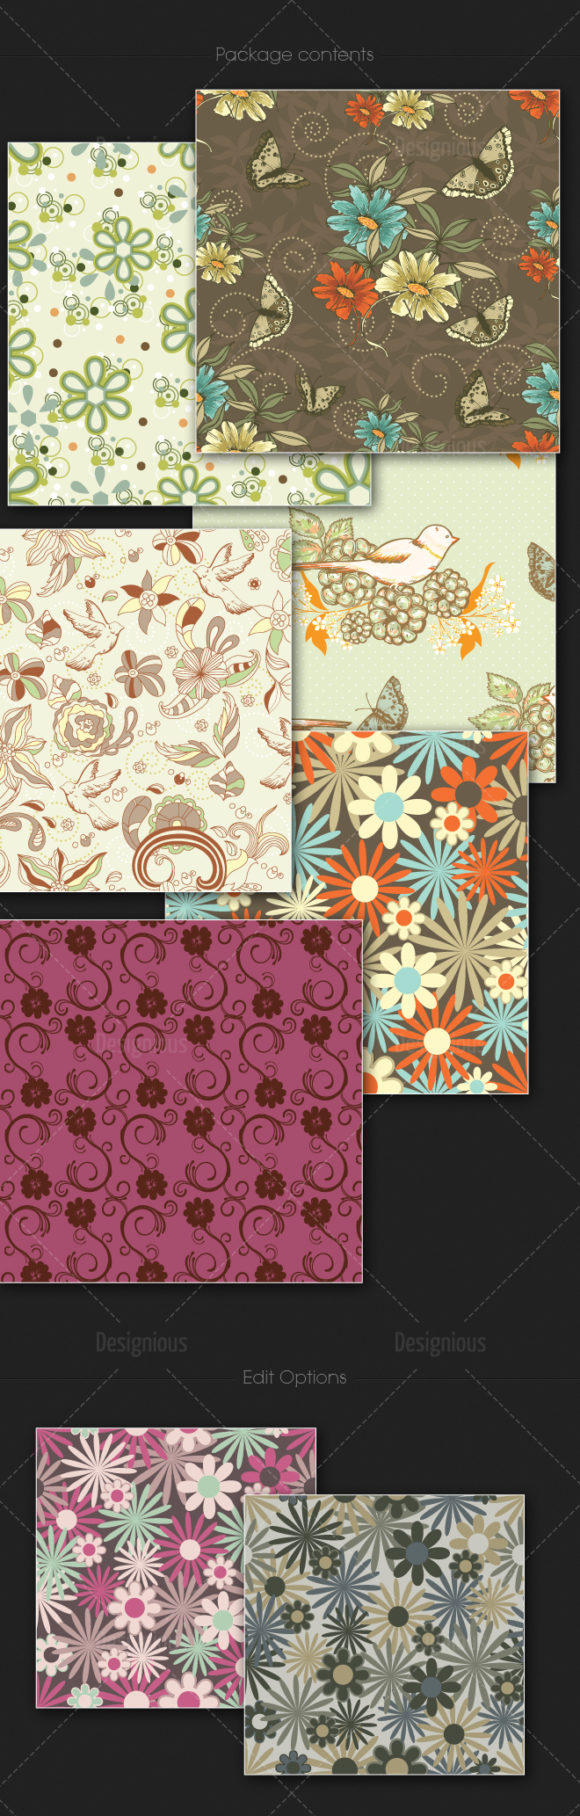 Seamless Patterns Vector Pack 121 2